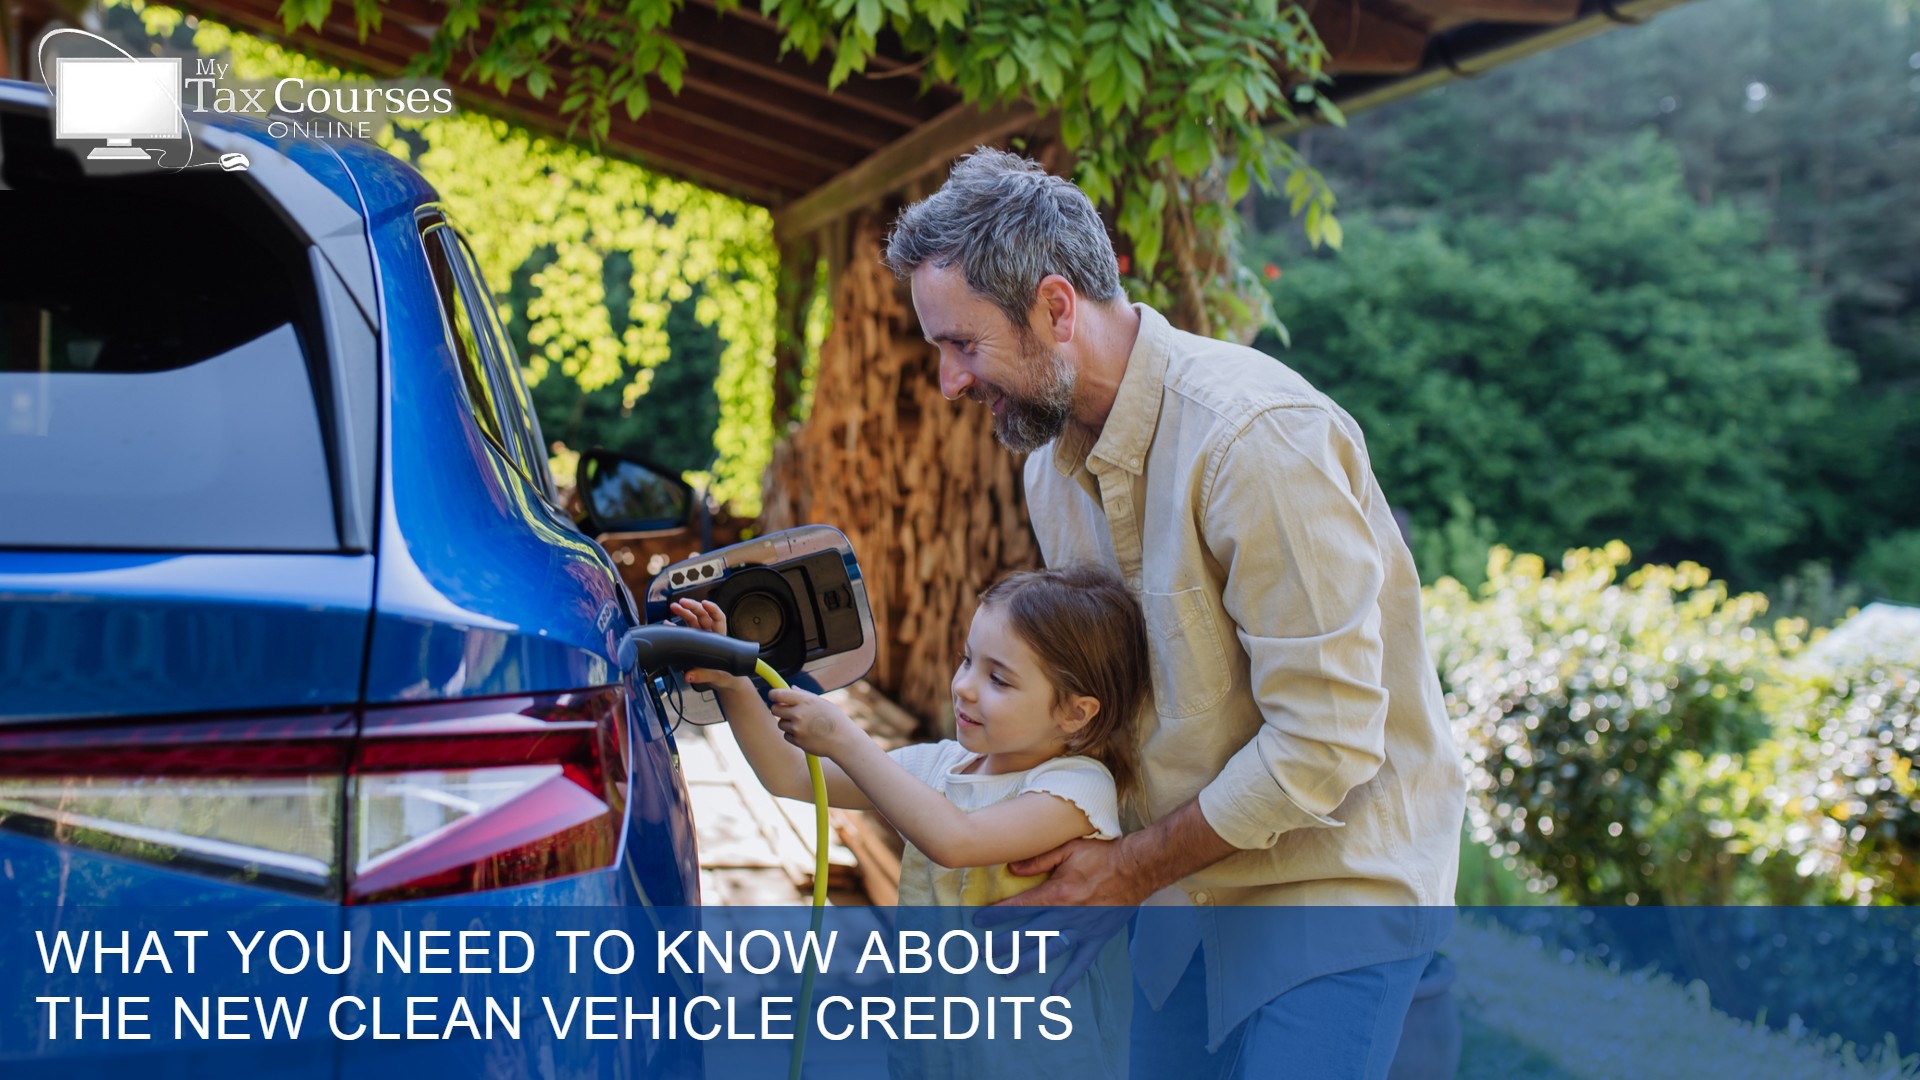 What You Need to Know About the New Clean Vehicle Credits